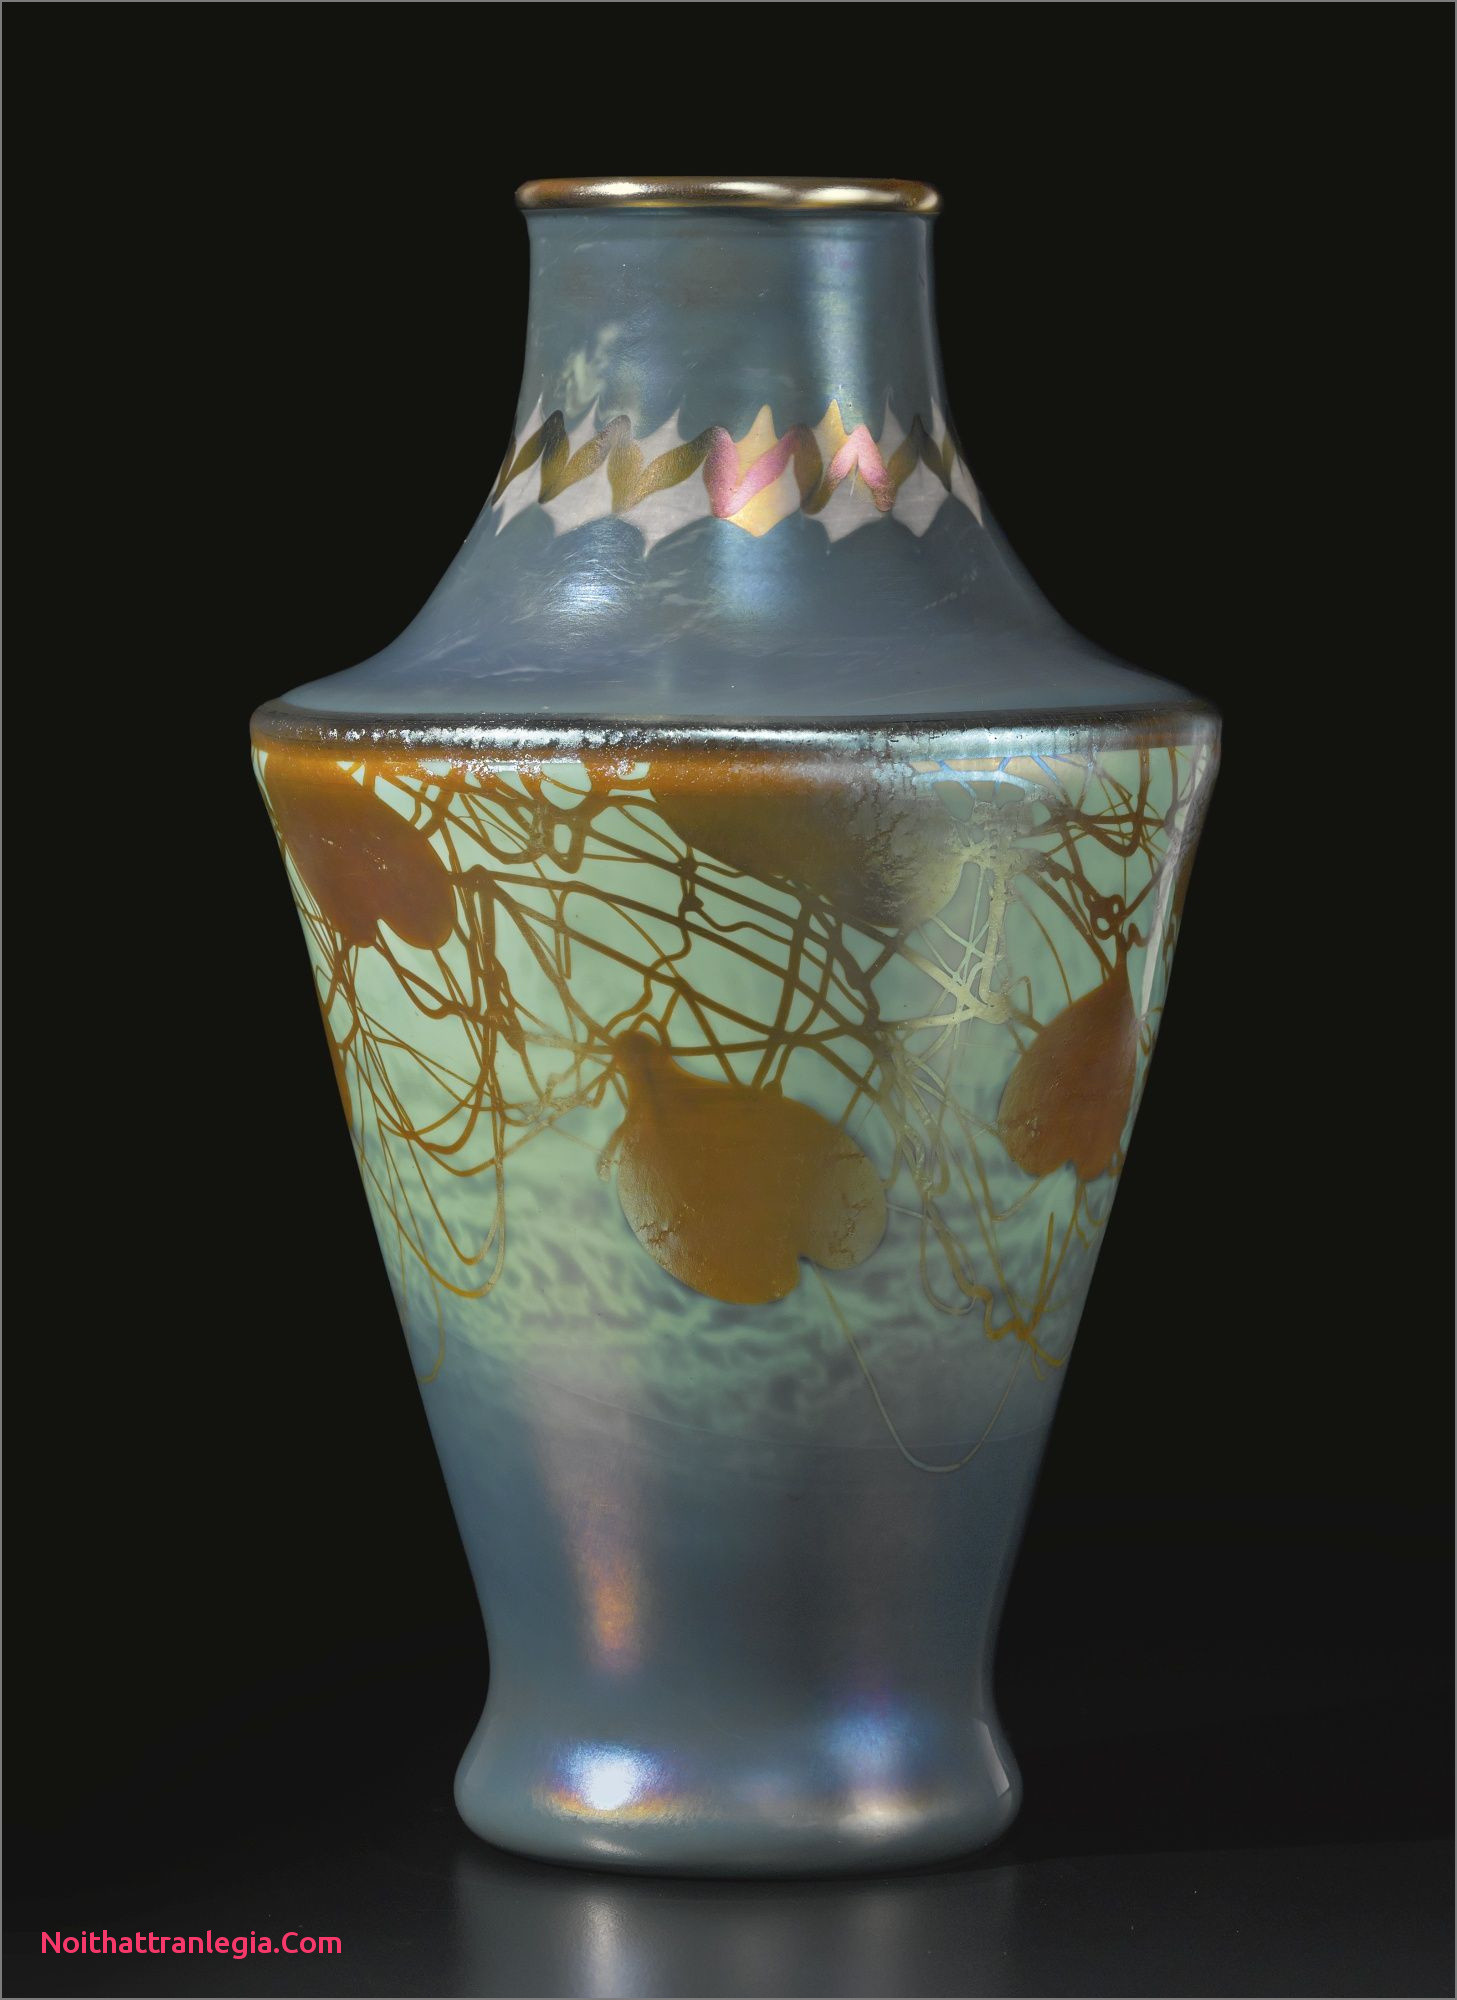 19 Fantastic Small Crystal Vase 2023 free download small crystal vase of 20 cut glass antique vase noithattranlegia vases design in steuben glass works a rare tyrian vase engraved with indistinct mark aurene glass with